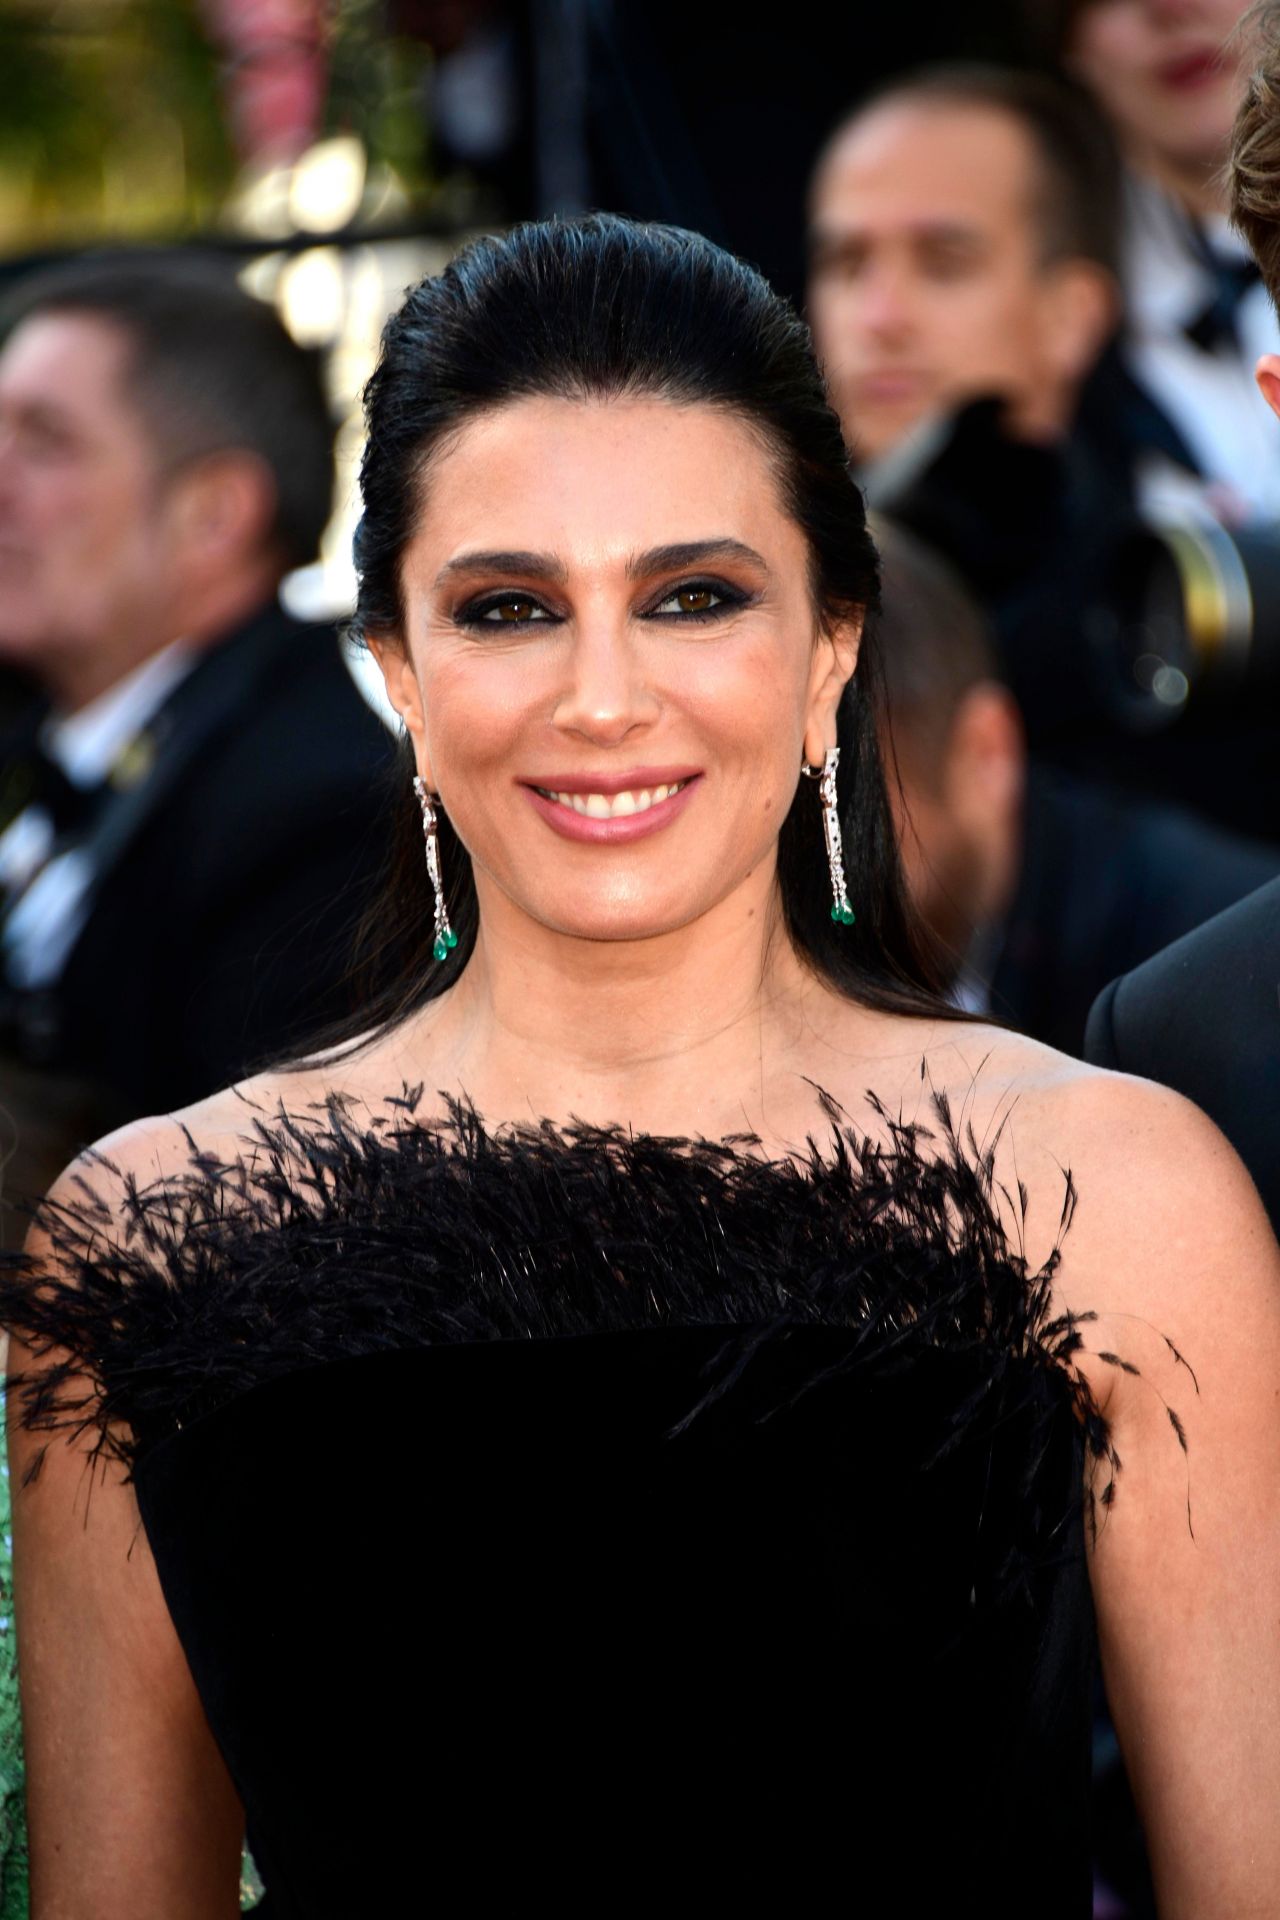 NADINE LABAKI AT LES MISERABLES RED CARPET 72ND ANNUAL CANNES FILM FESTIVAL